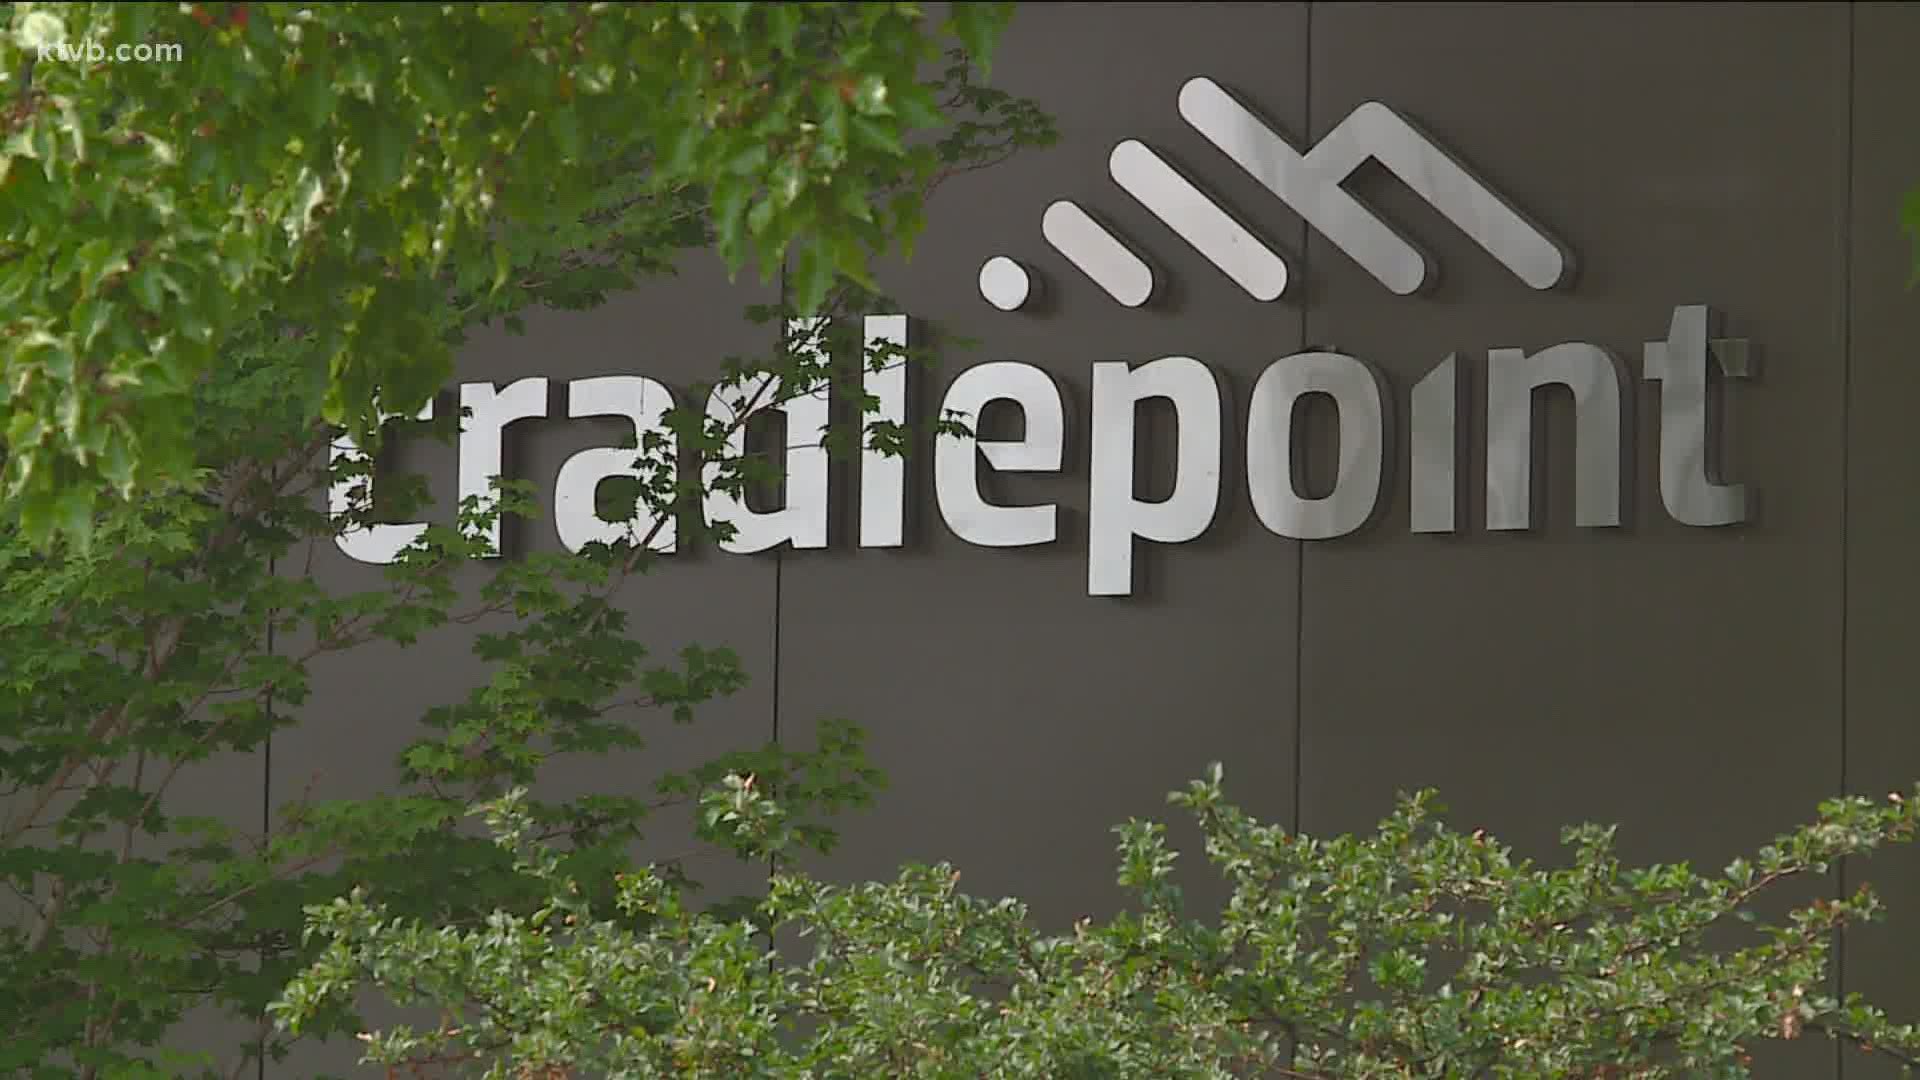 The business will continue to operate under its existing brand, and Cradlepoint employees will remain with the Boise company.